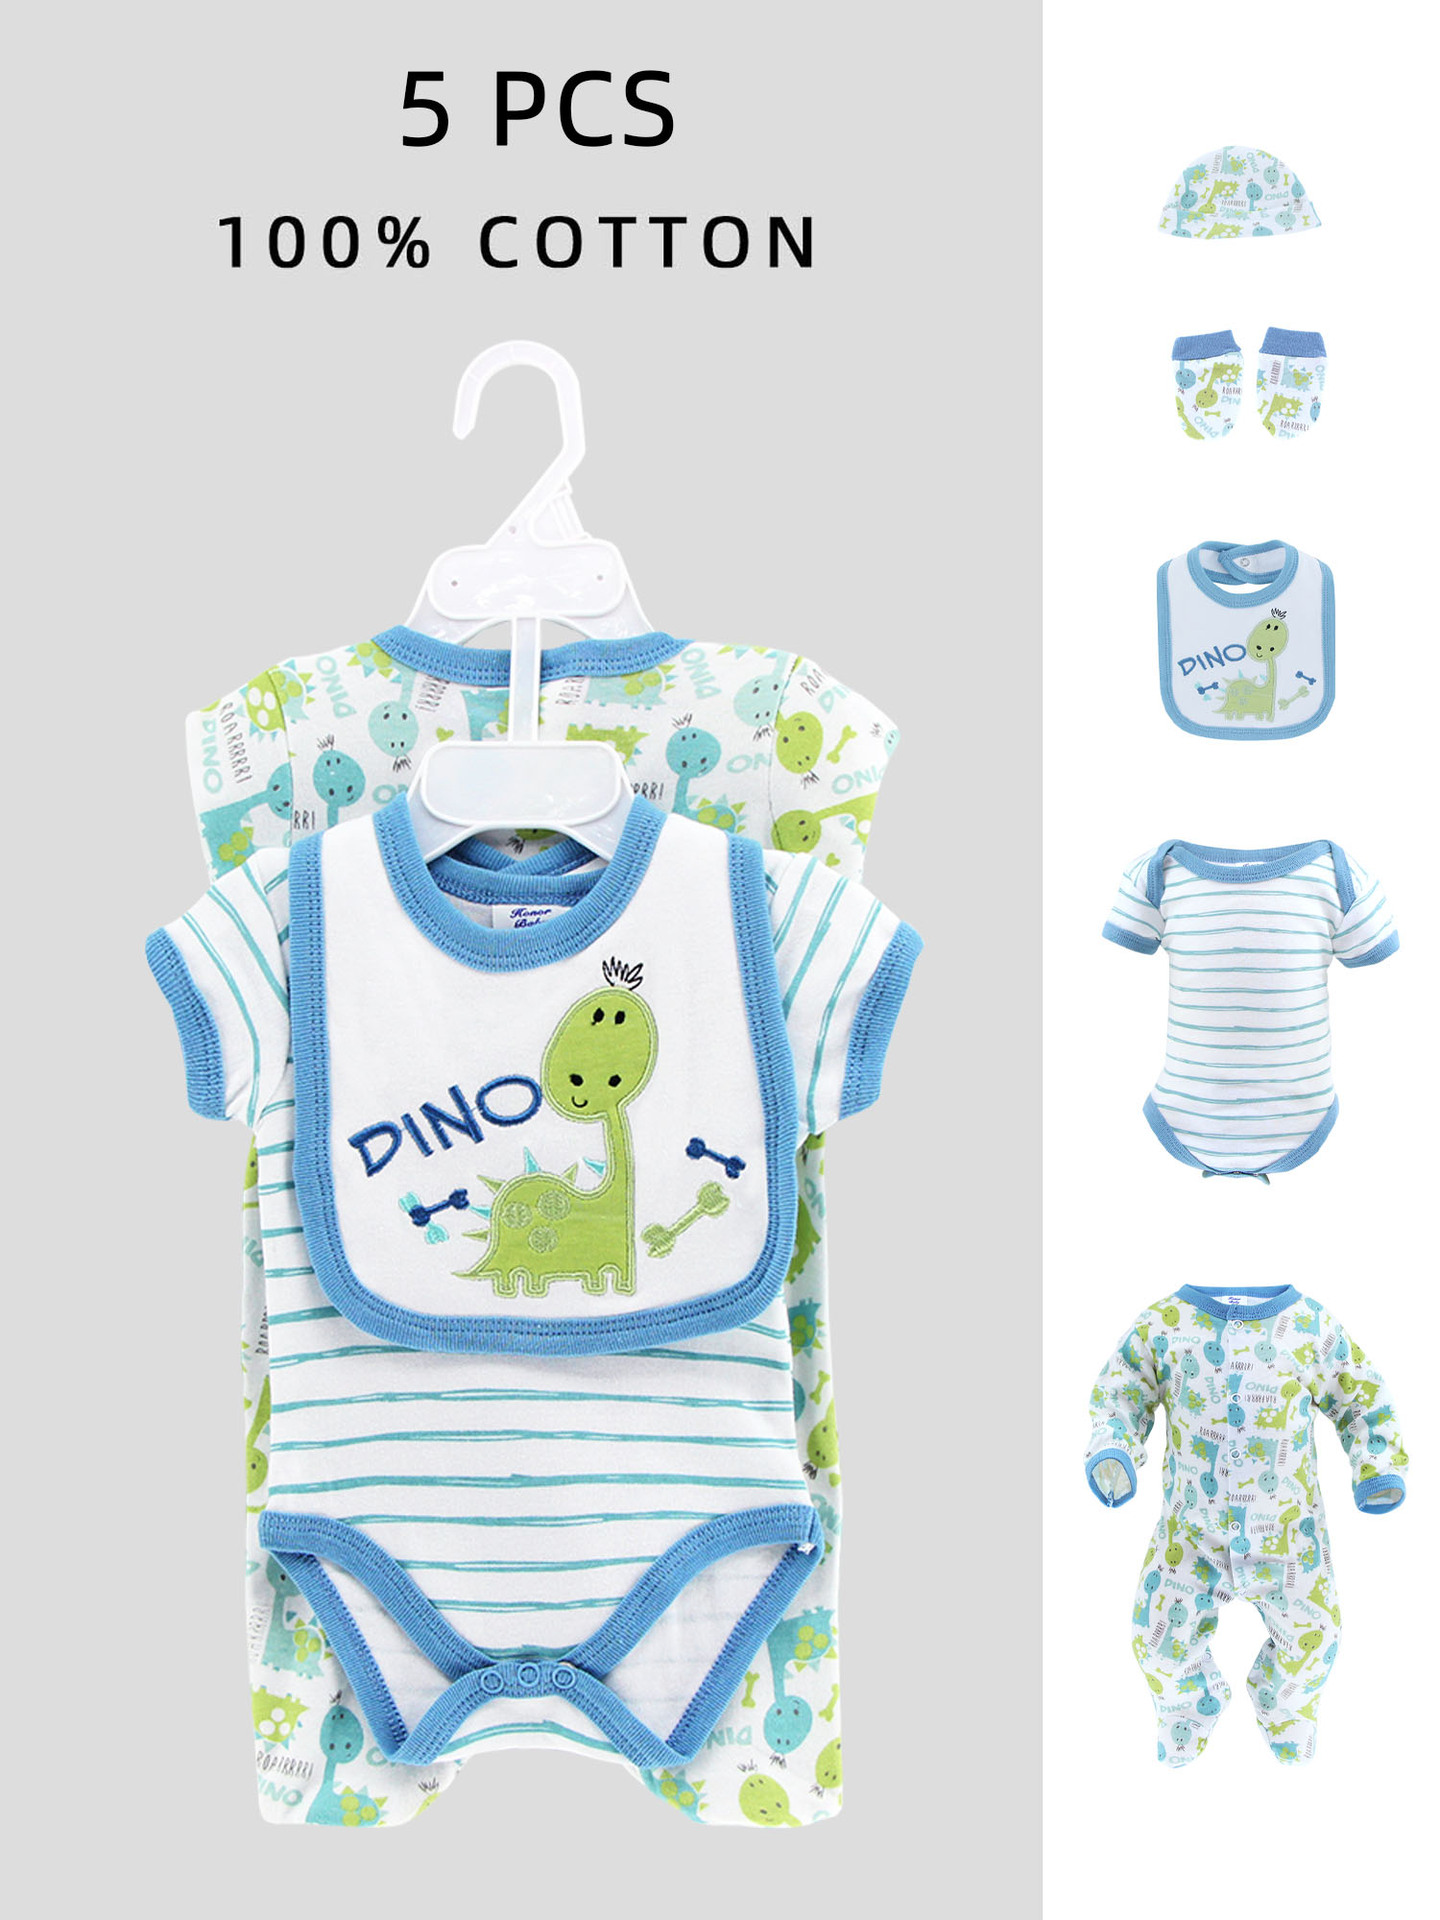 foreign trade new baby suit split clothes newborn one month old baby four seasons one-piece pajamas europe and america cross border clothing